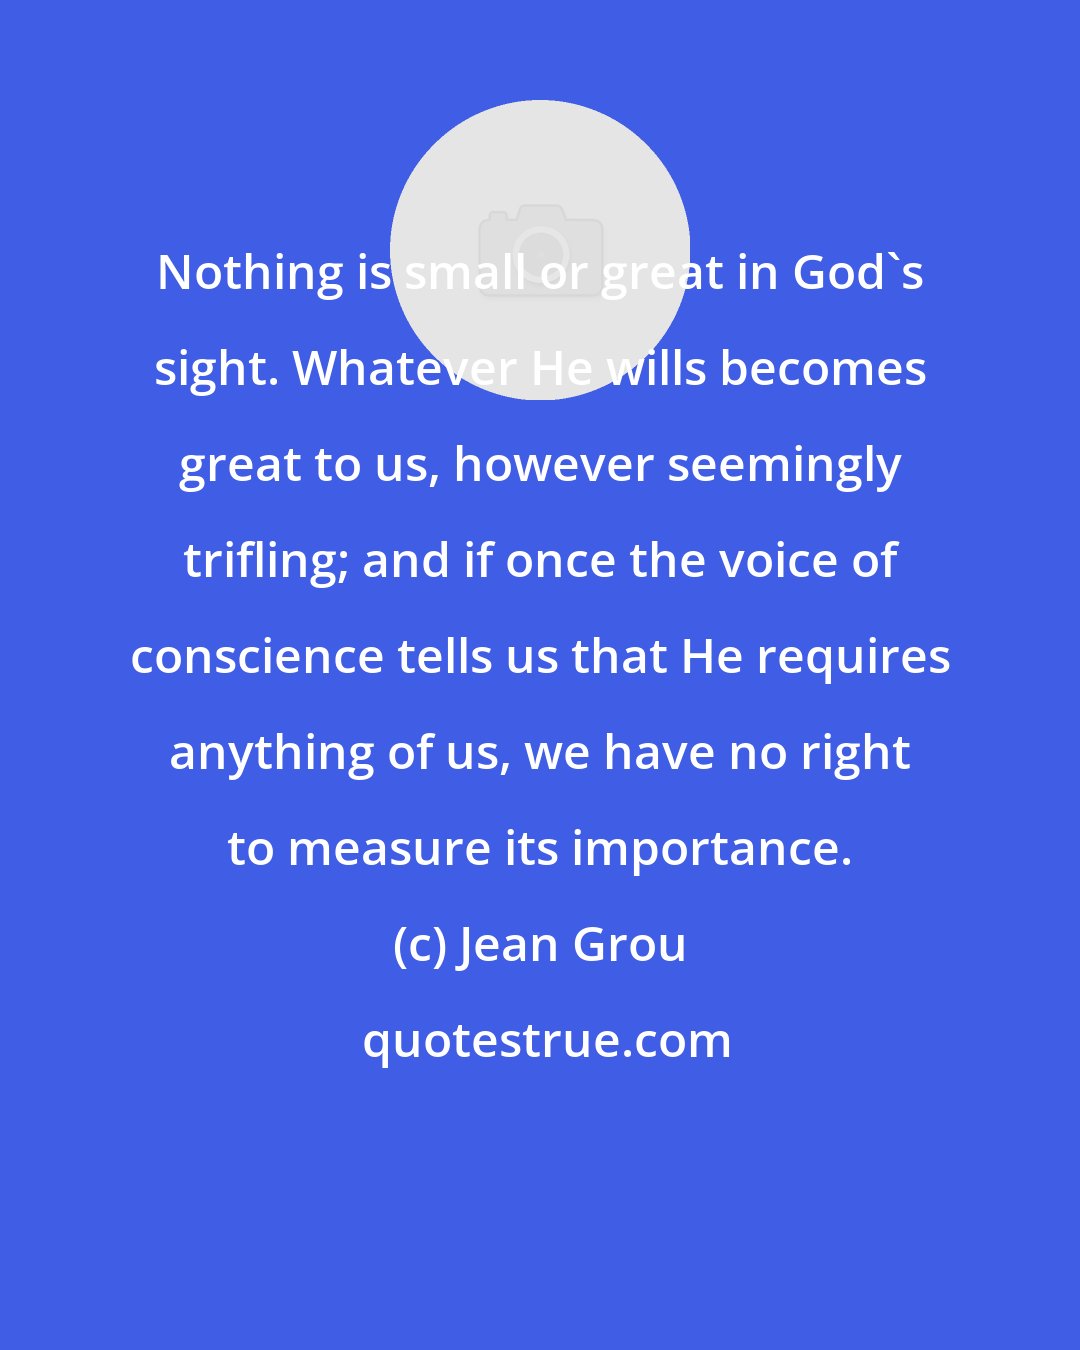 Jean Grou: Nothing is small or great in God's sight. Whatever He wills becomes great to us, however seemingly trifling; and if once the voice of conscience tells us that He requires anything of us, we have no right to measure its importance.